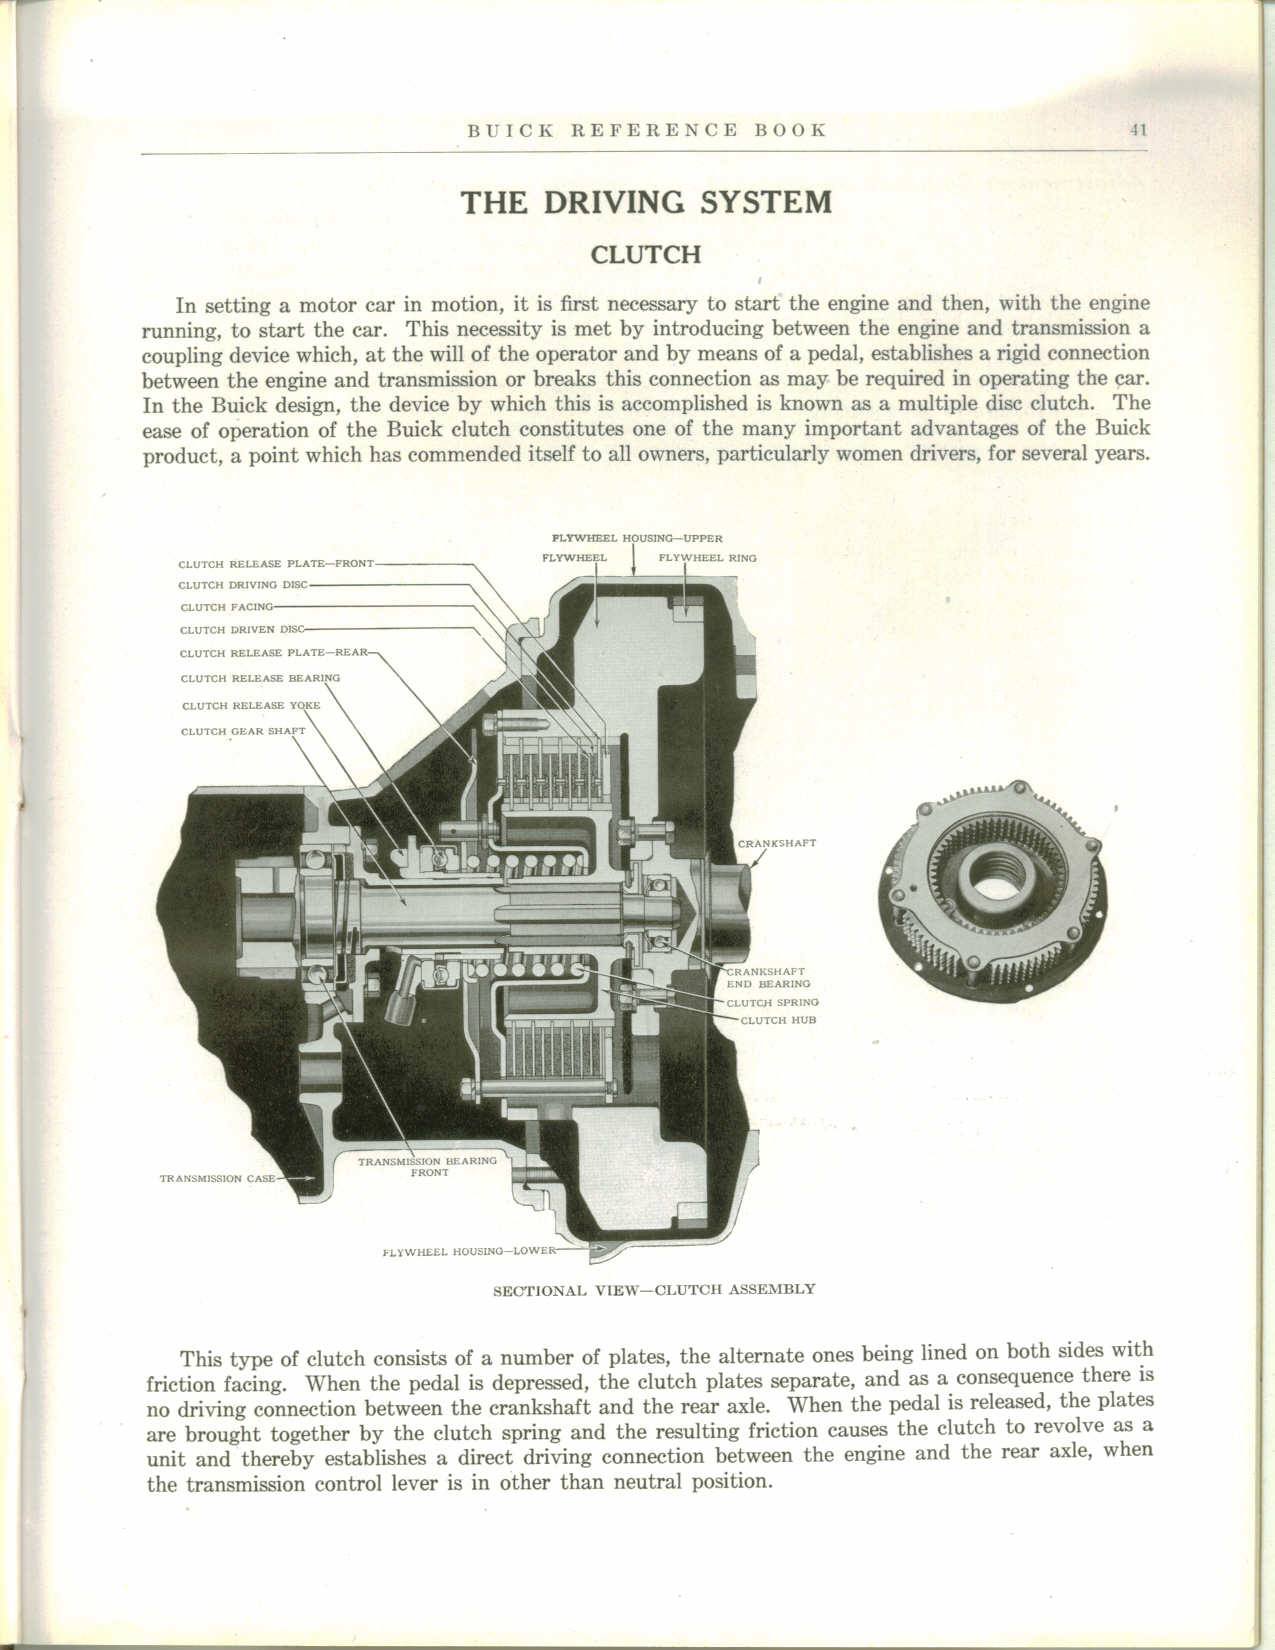 1928 Buick Reference Book-41